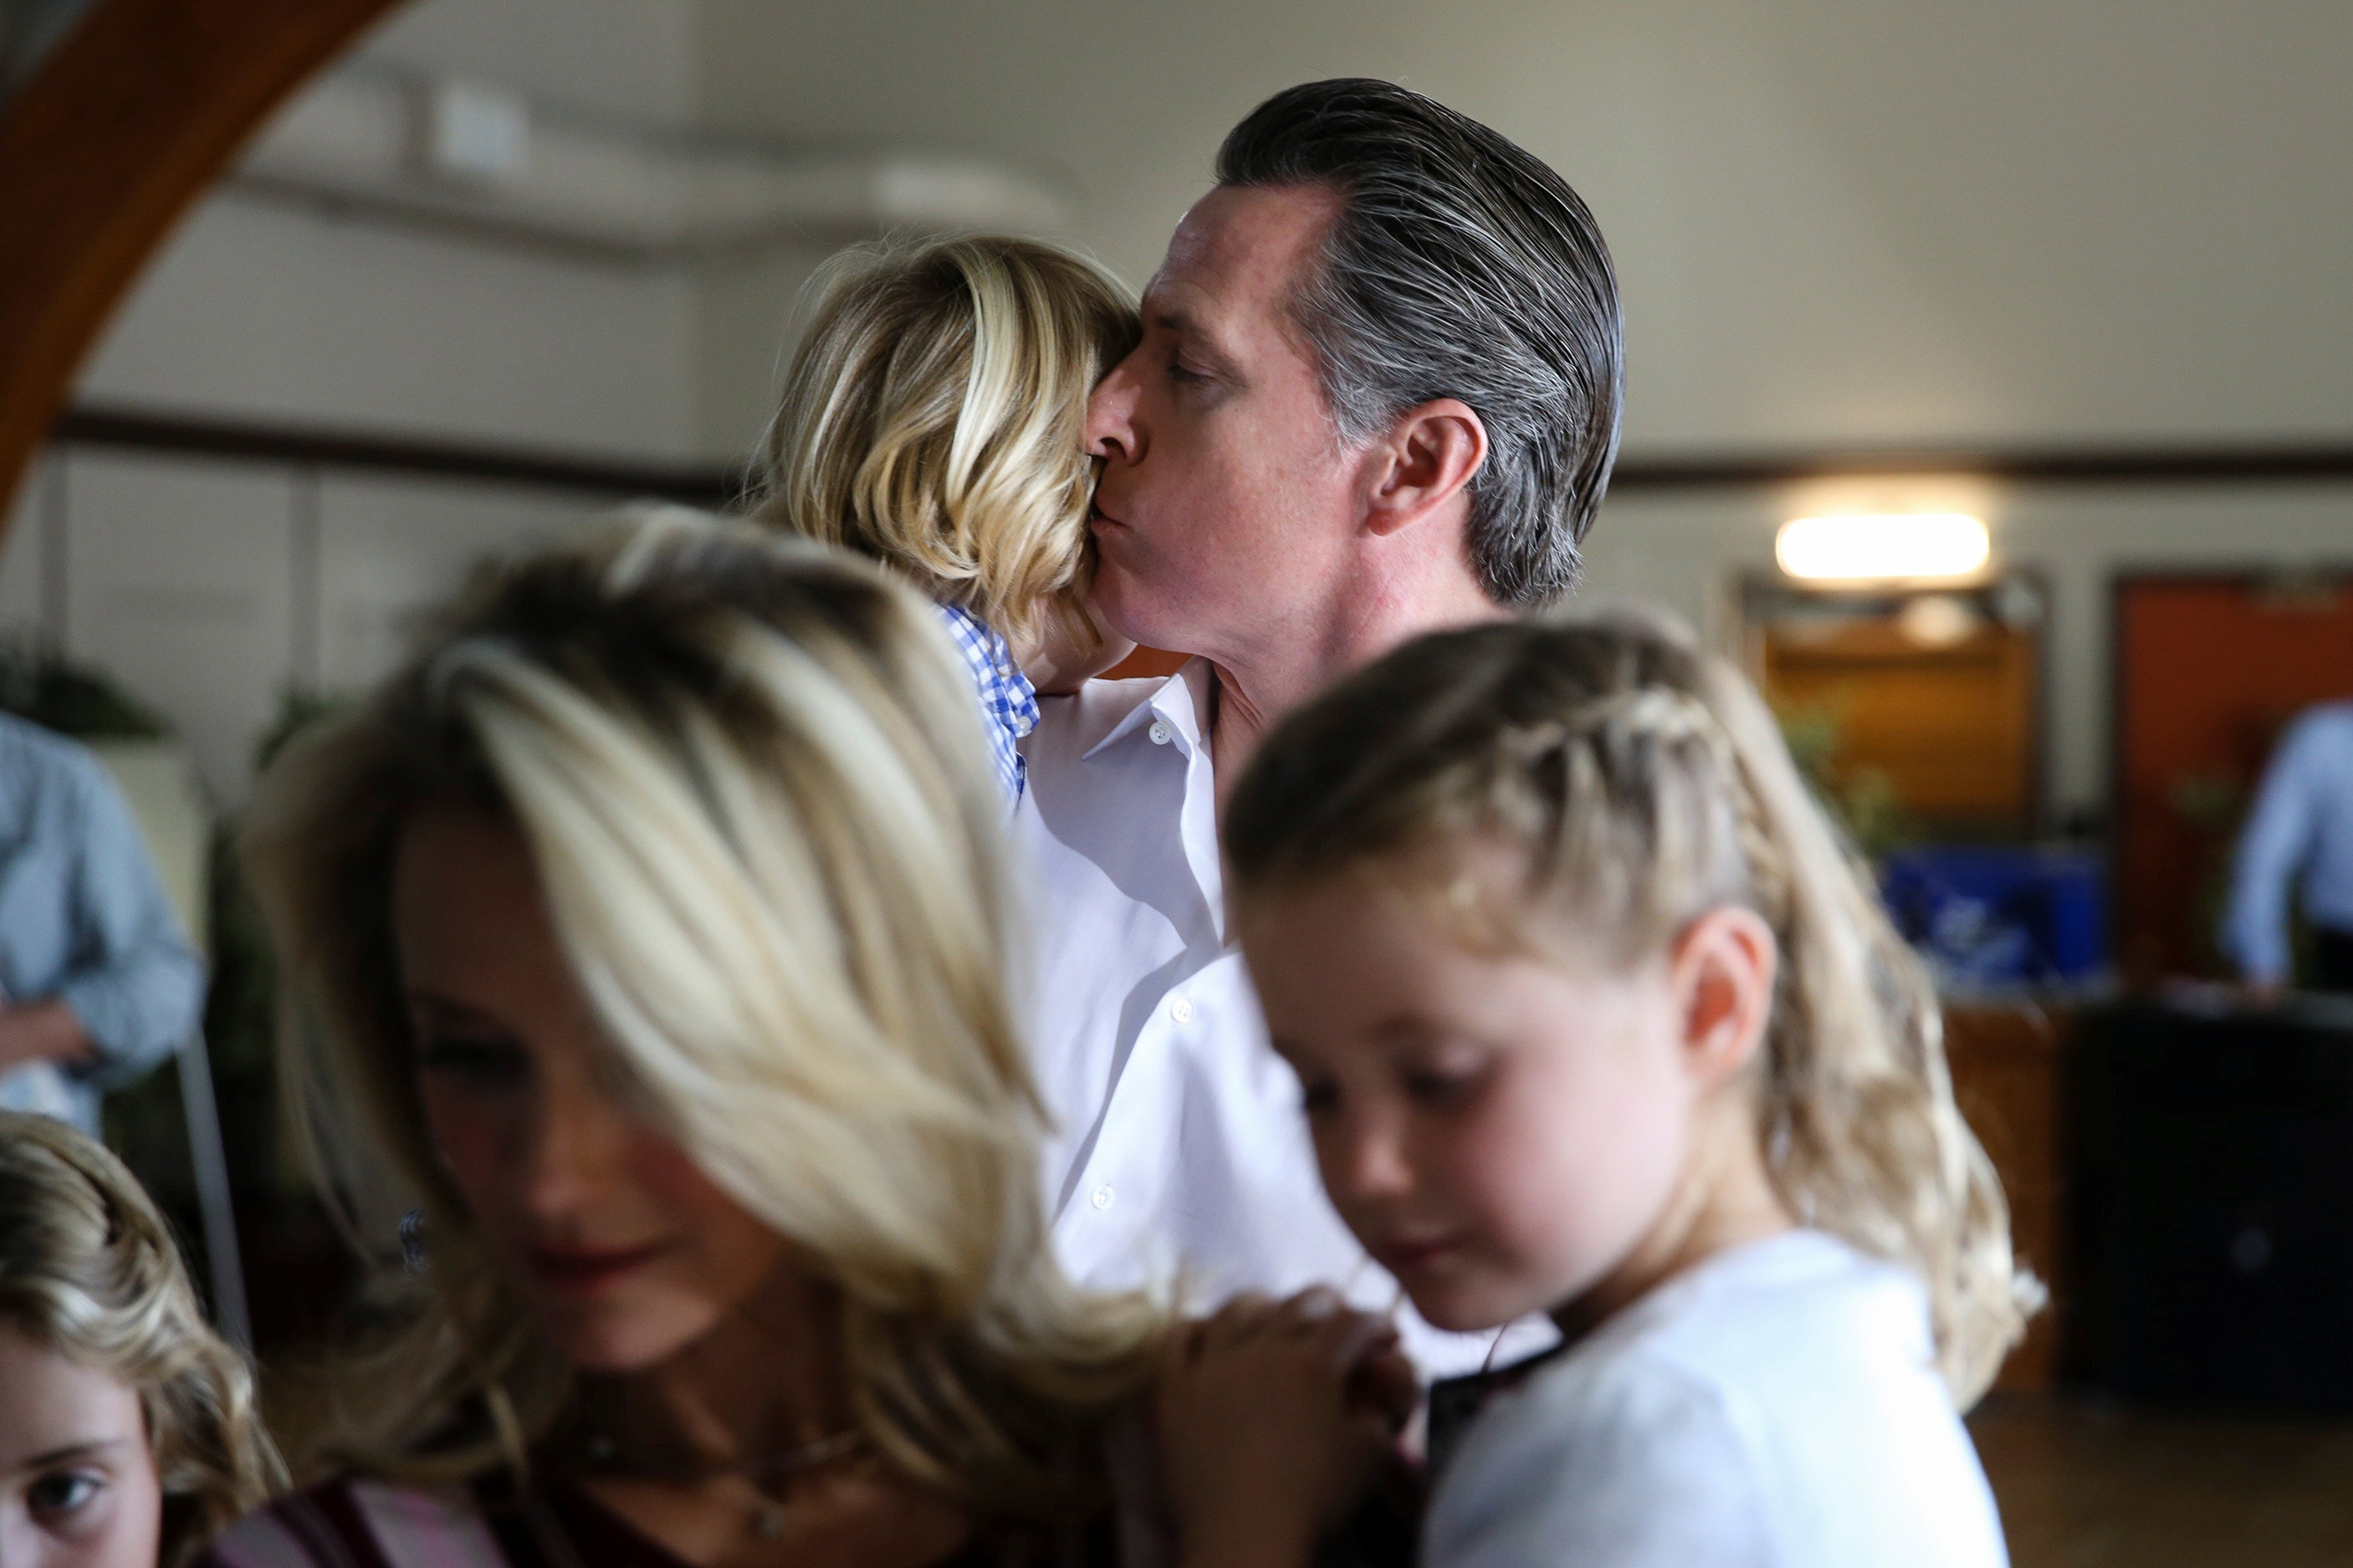 California Democratic gubernatorial candidate Gavin Newsom kisses his son while waiting for his wife to receive her ballot in Larkspur, Calif. (Elijah Nouvelage—Reuters)